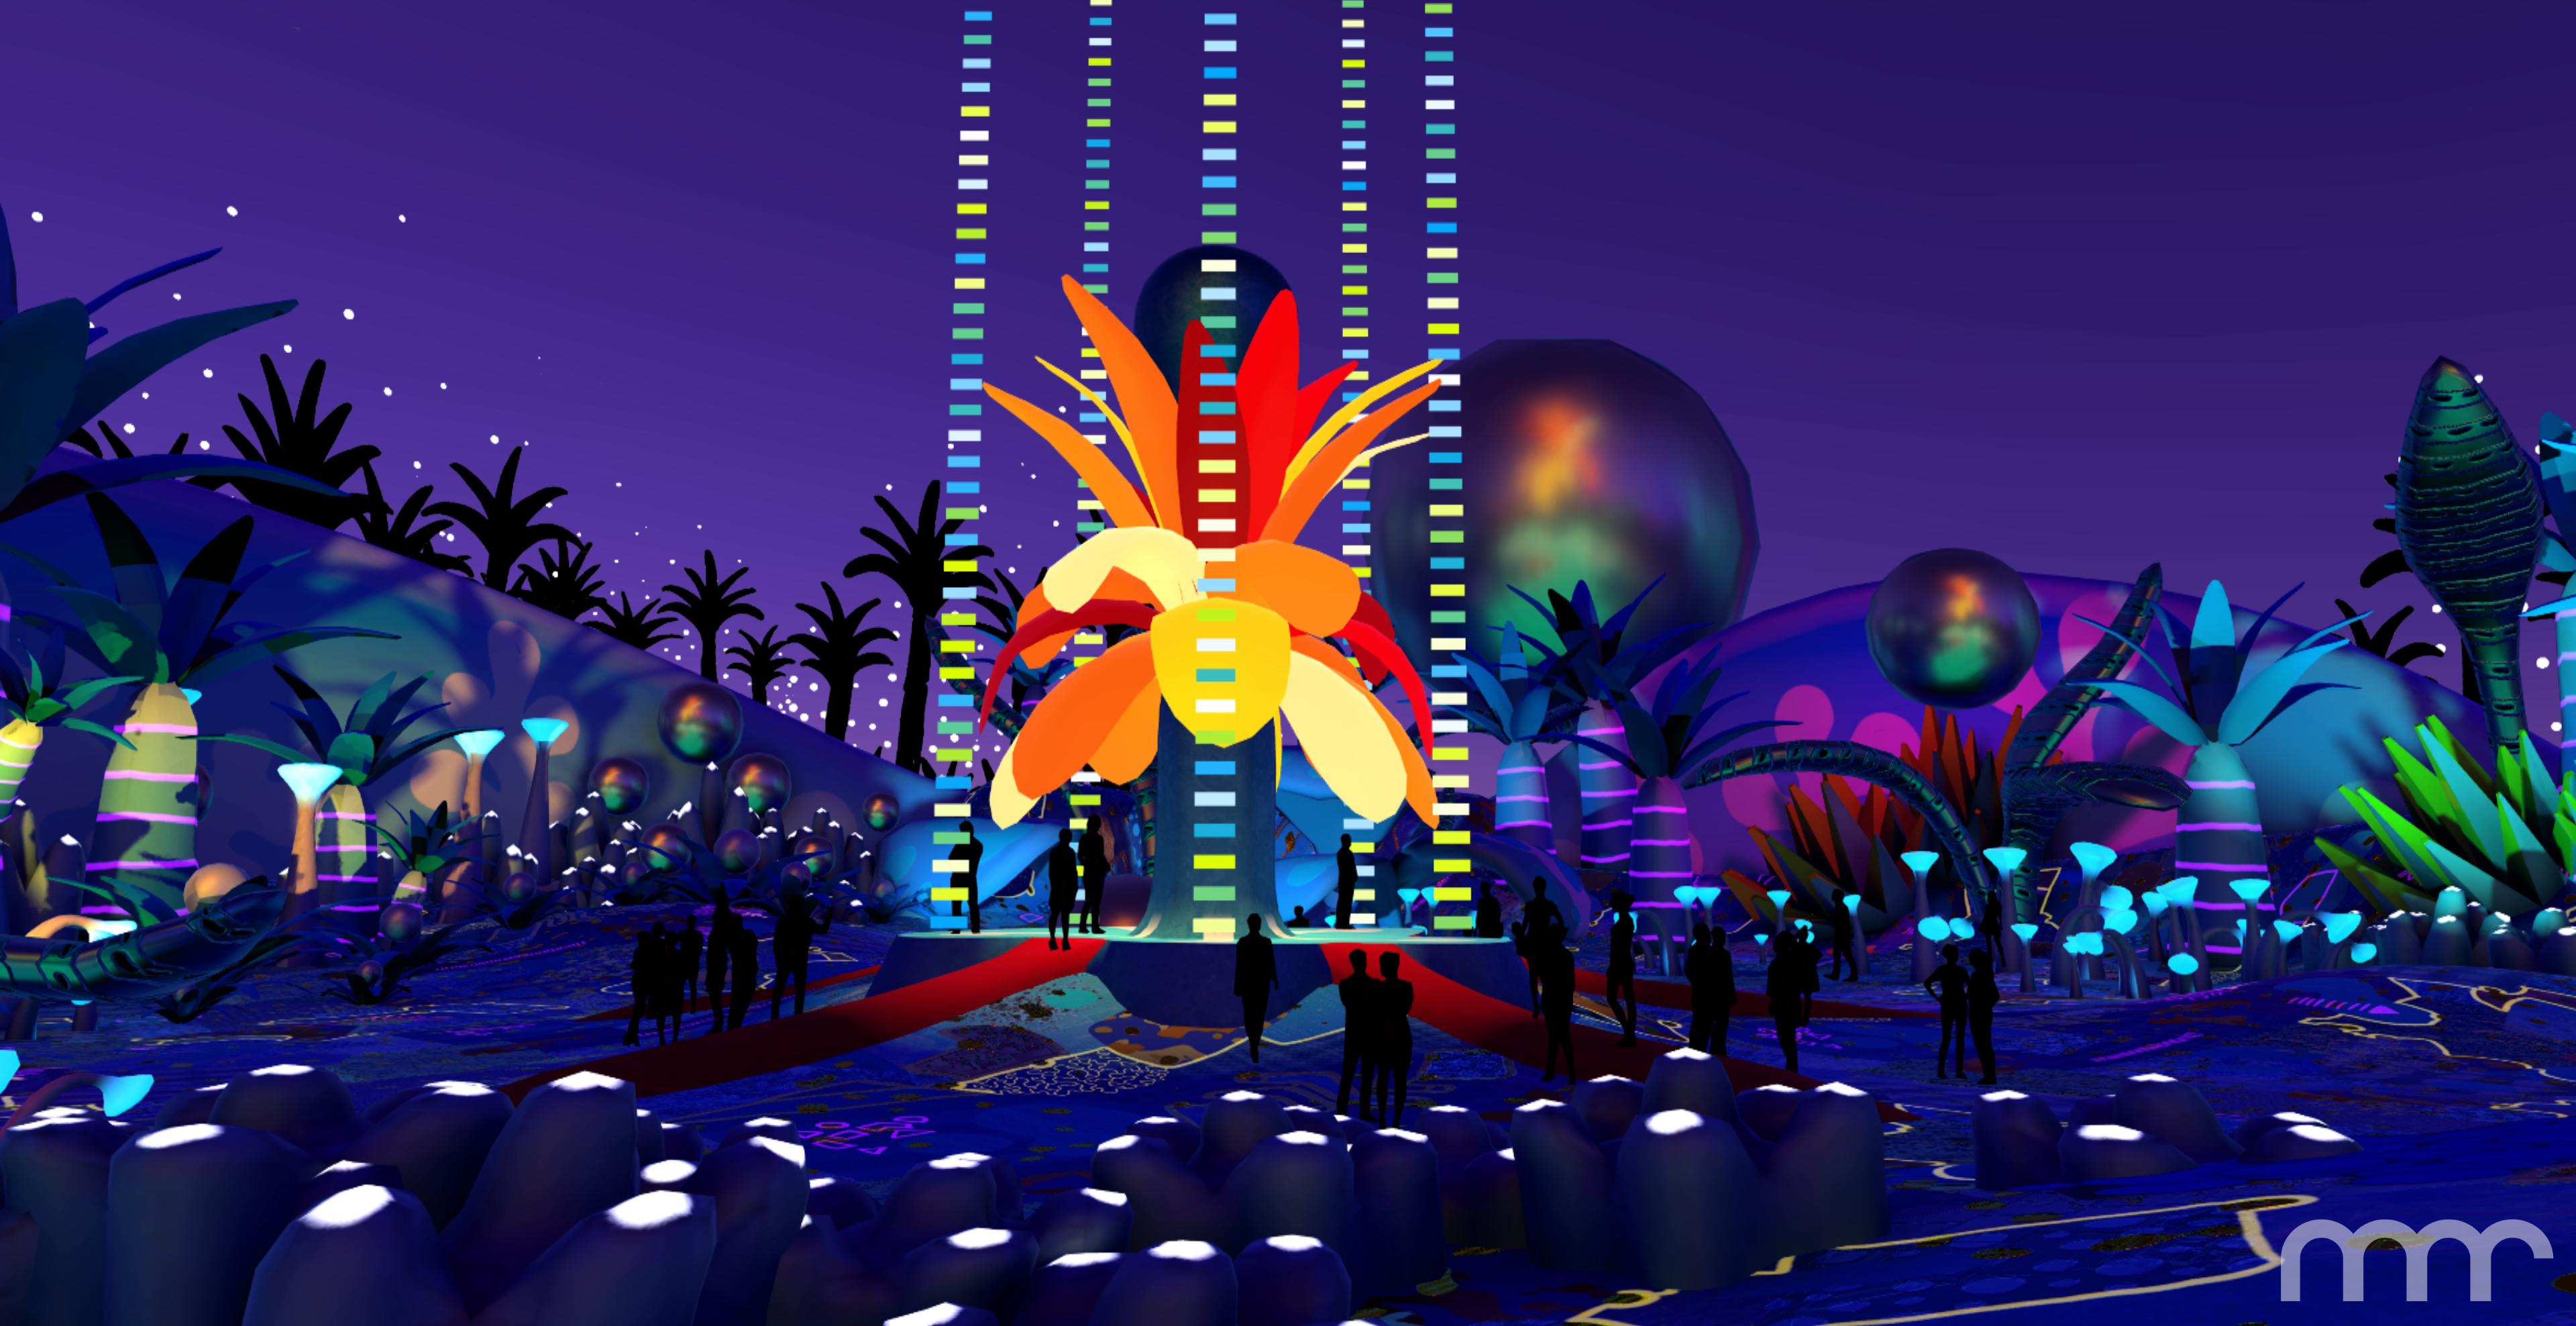 Unity for Humanity Garden featured at Cannes XR